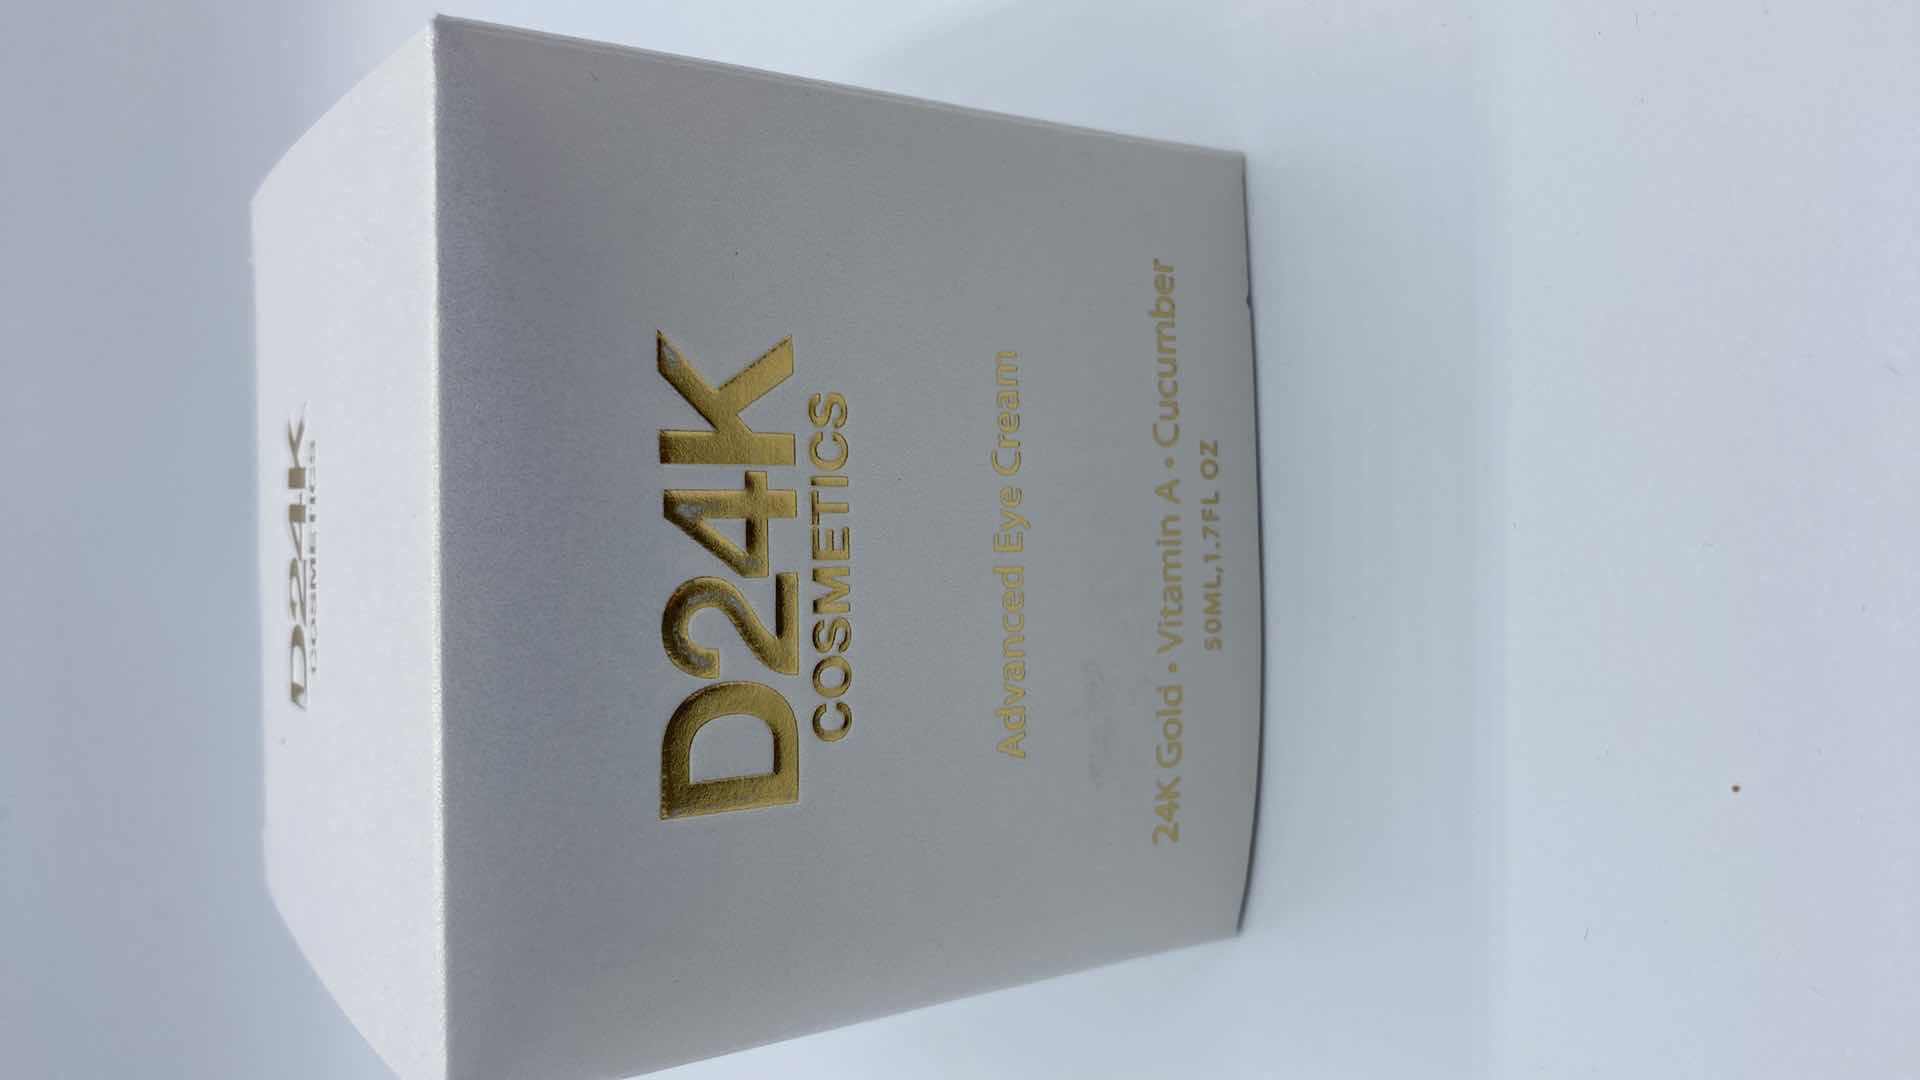 Photo 2 of NEW D24K ADVANCED EYE CREAM - SLOWS DEPLETION OF COLLAGEN AND STIMULATES CELL GROWTH FOR PLUMP LIFTED HYDRATED SKIN